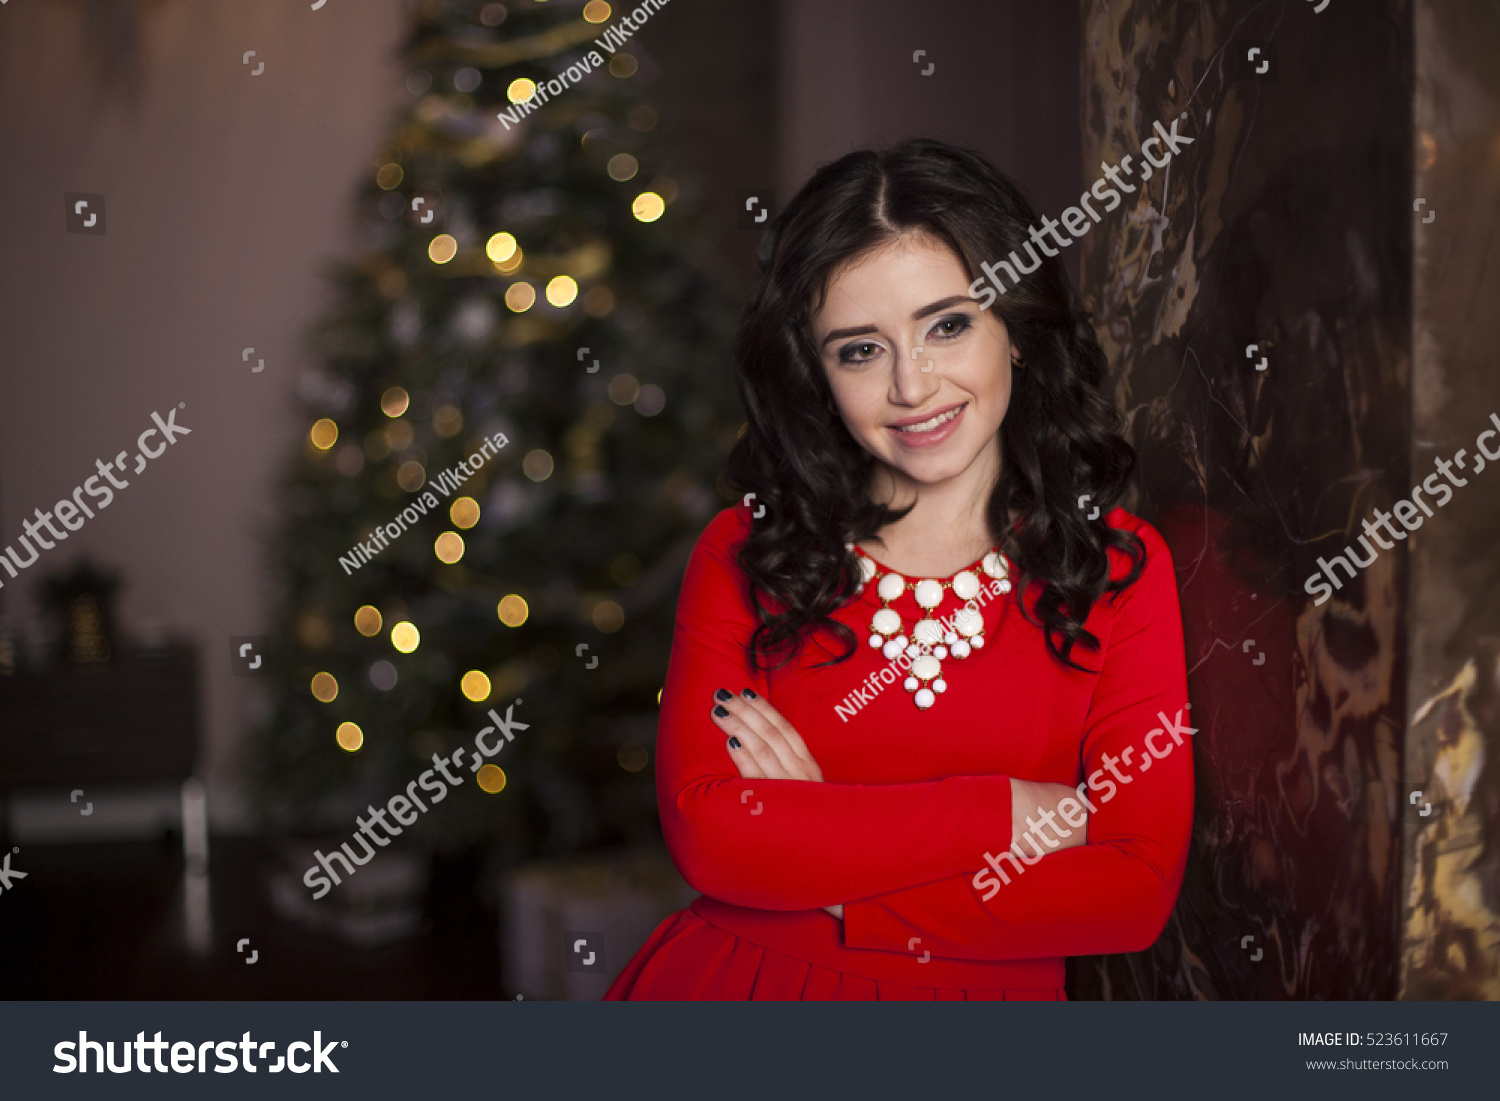 Cute girl in red dress with Christmas tree #523611667